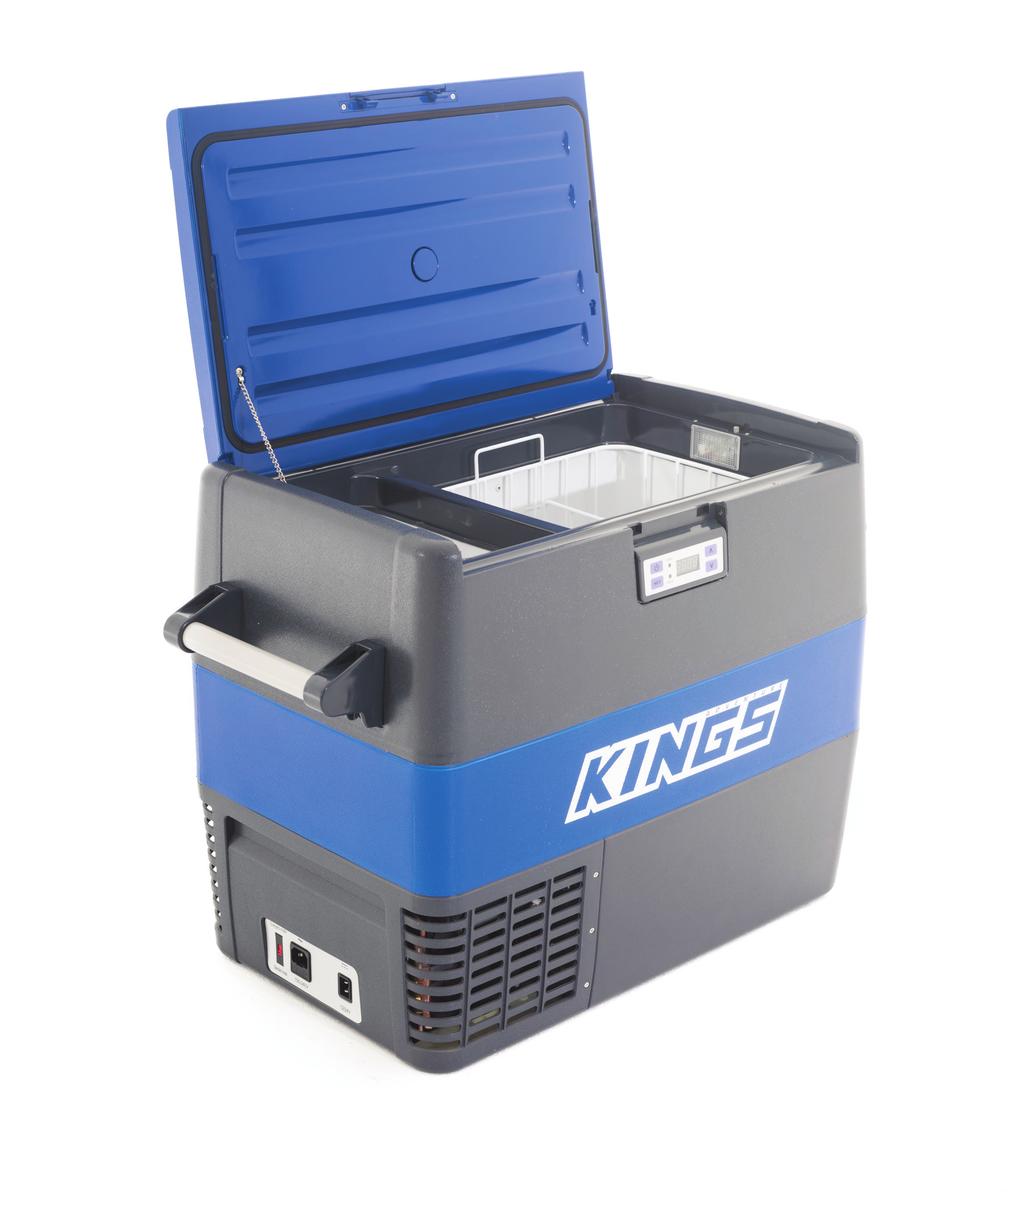 Adventure Kings 50L Refrigerator USER MANUAL Please read and understand these